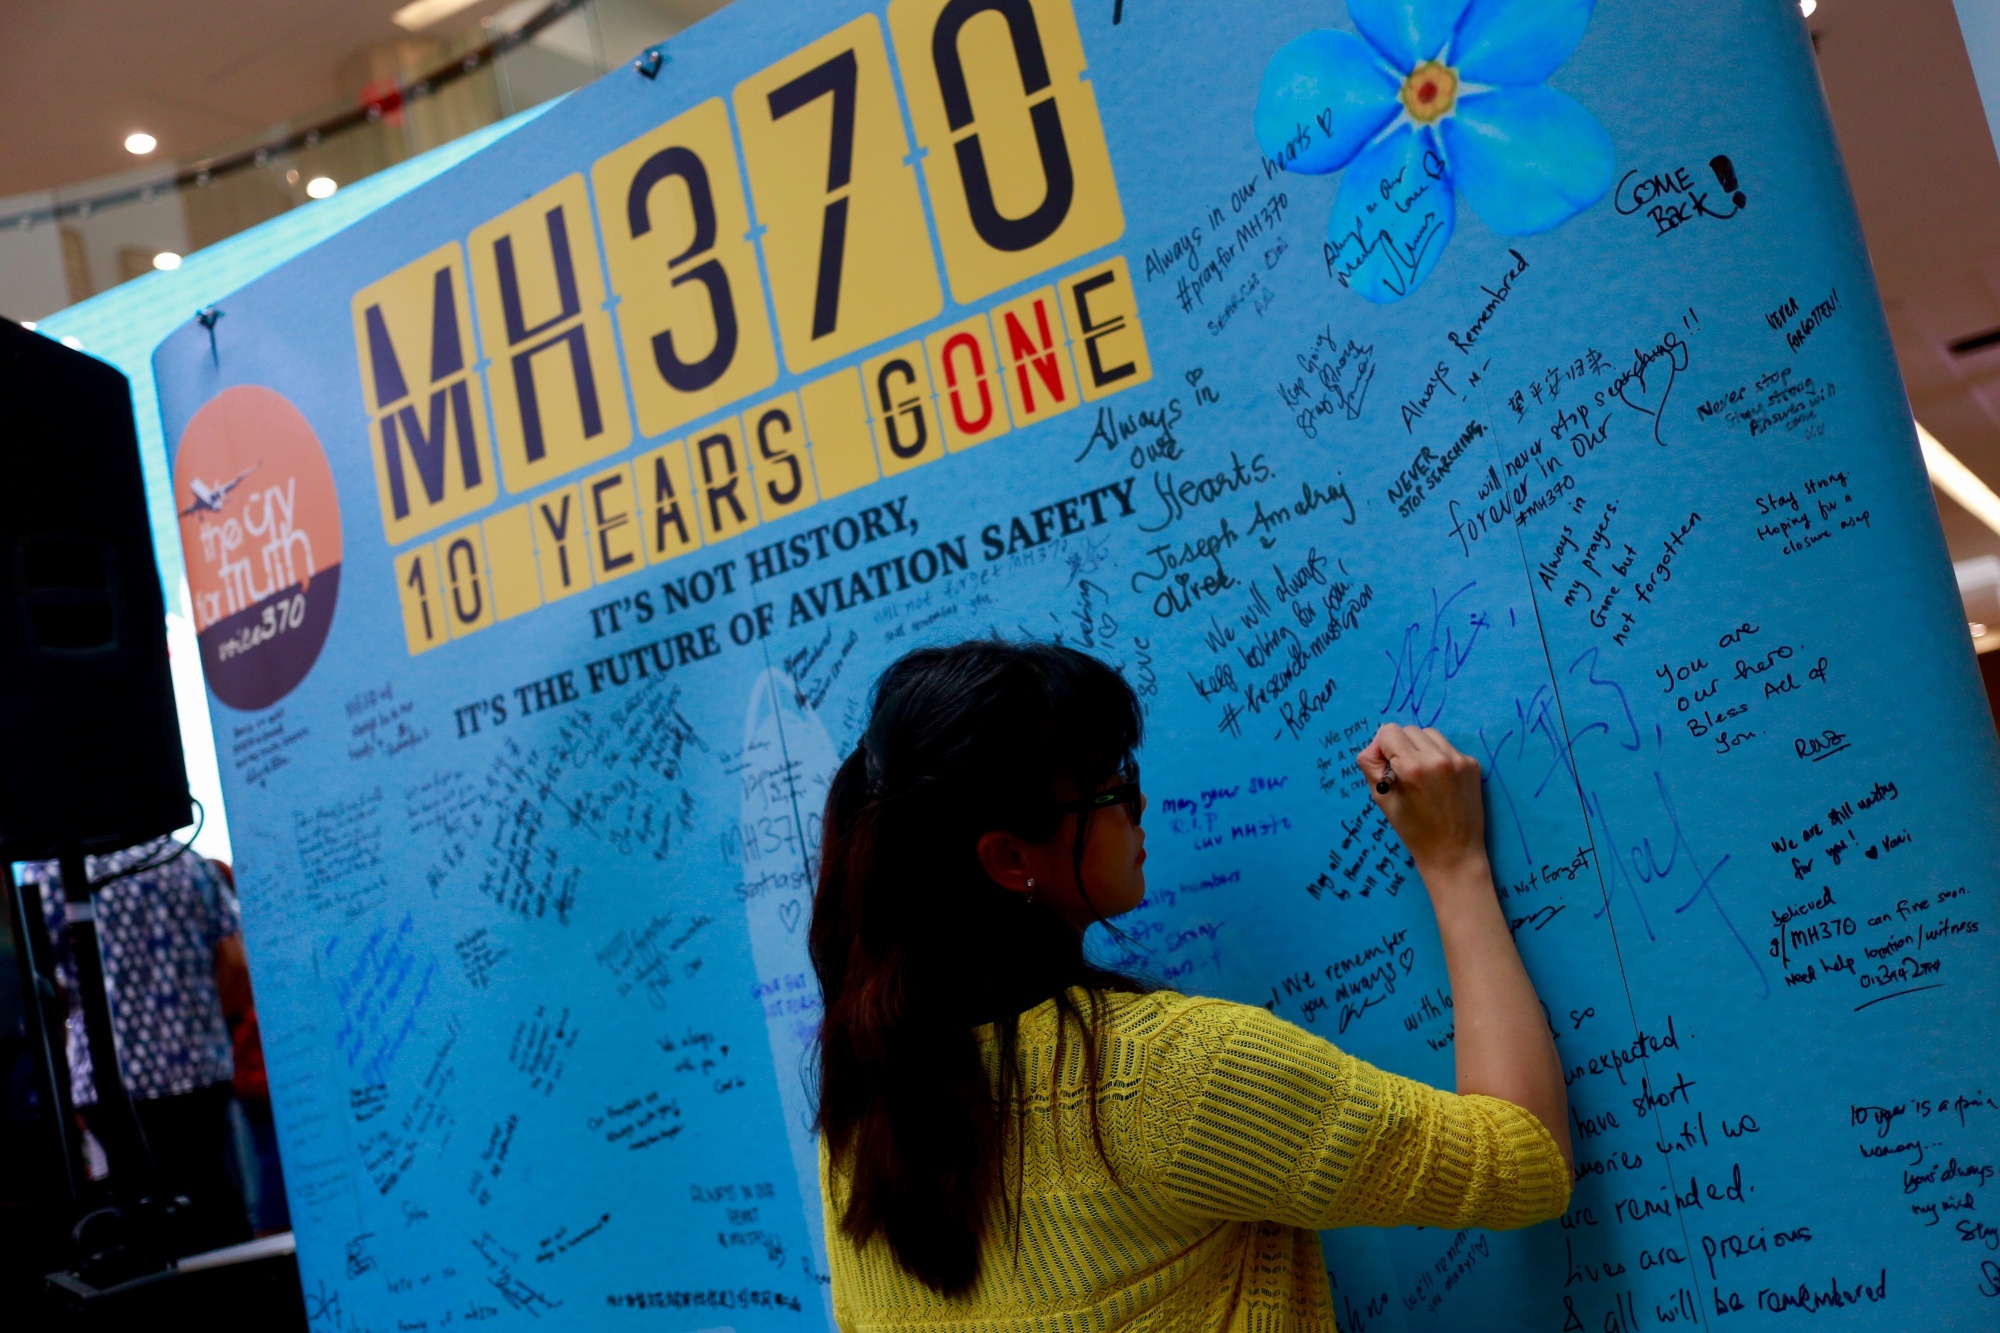 Malaysia May Resume Search for MH370 Decade After Plane Vanished - Bloomberg